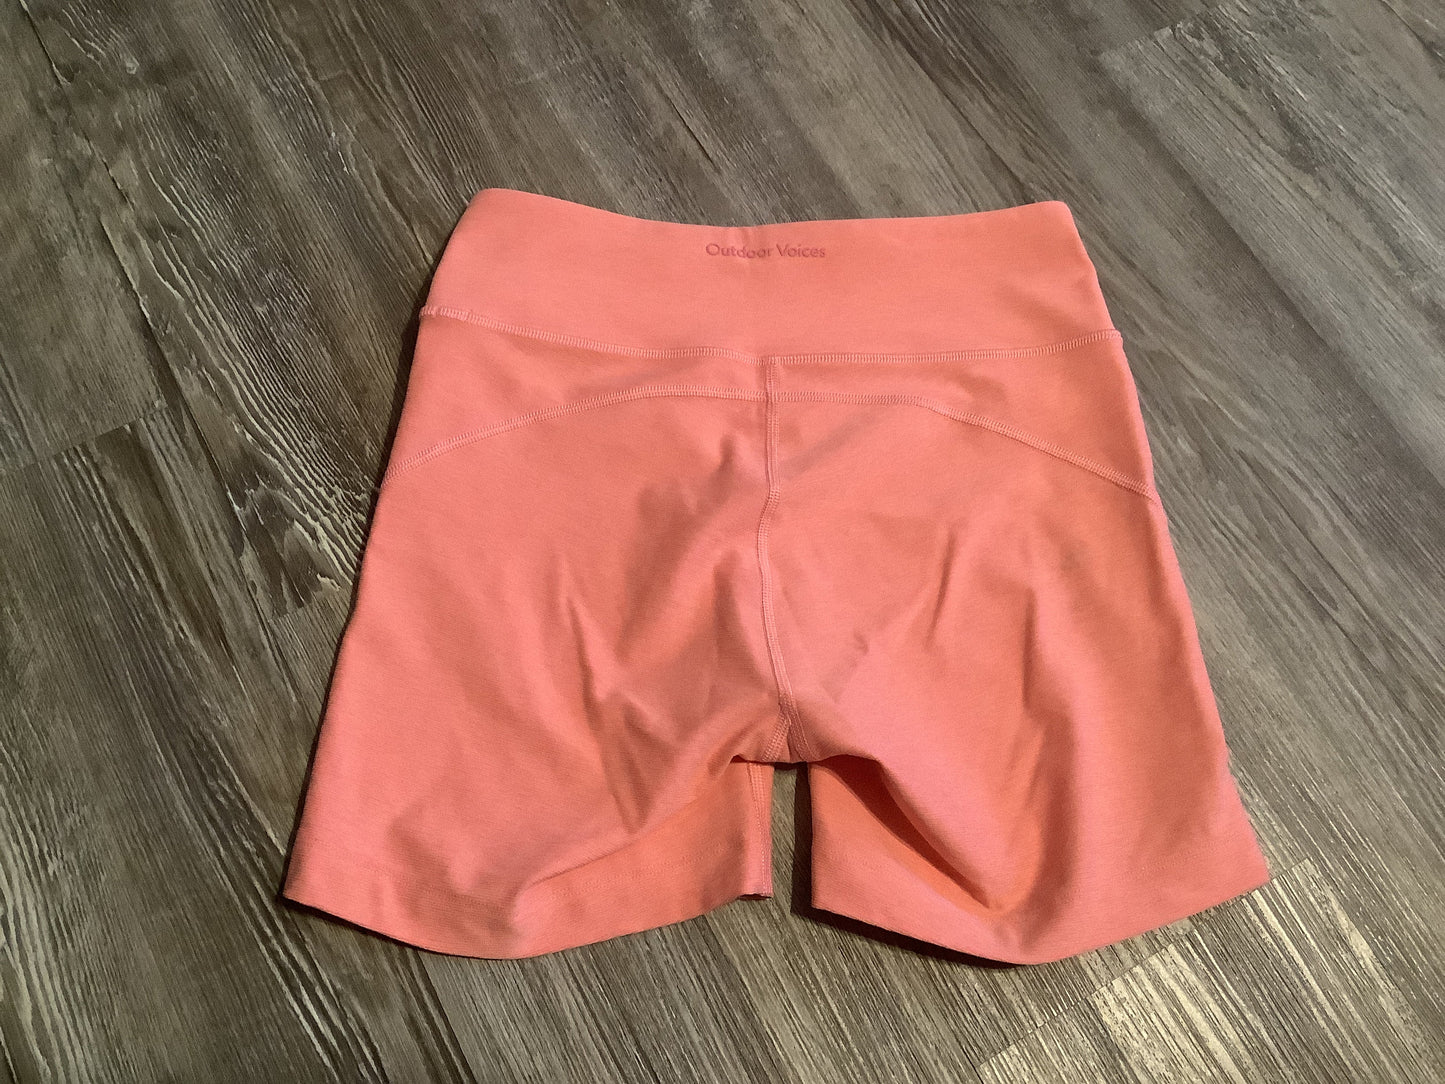 Pink Athletic Shorts Outdoor Voices, Size S